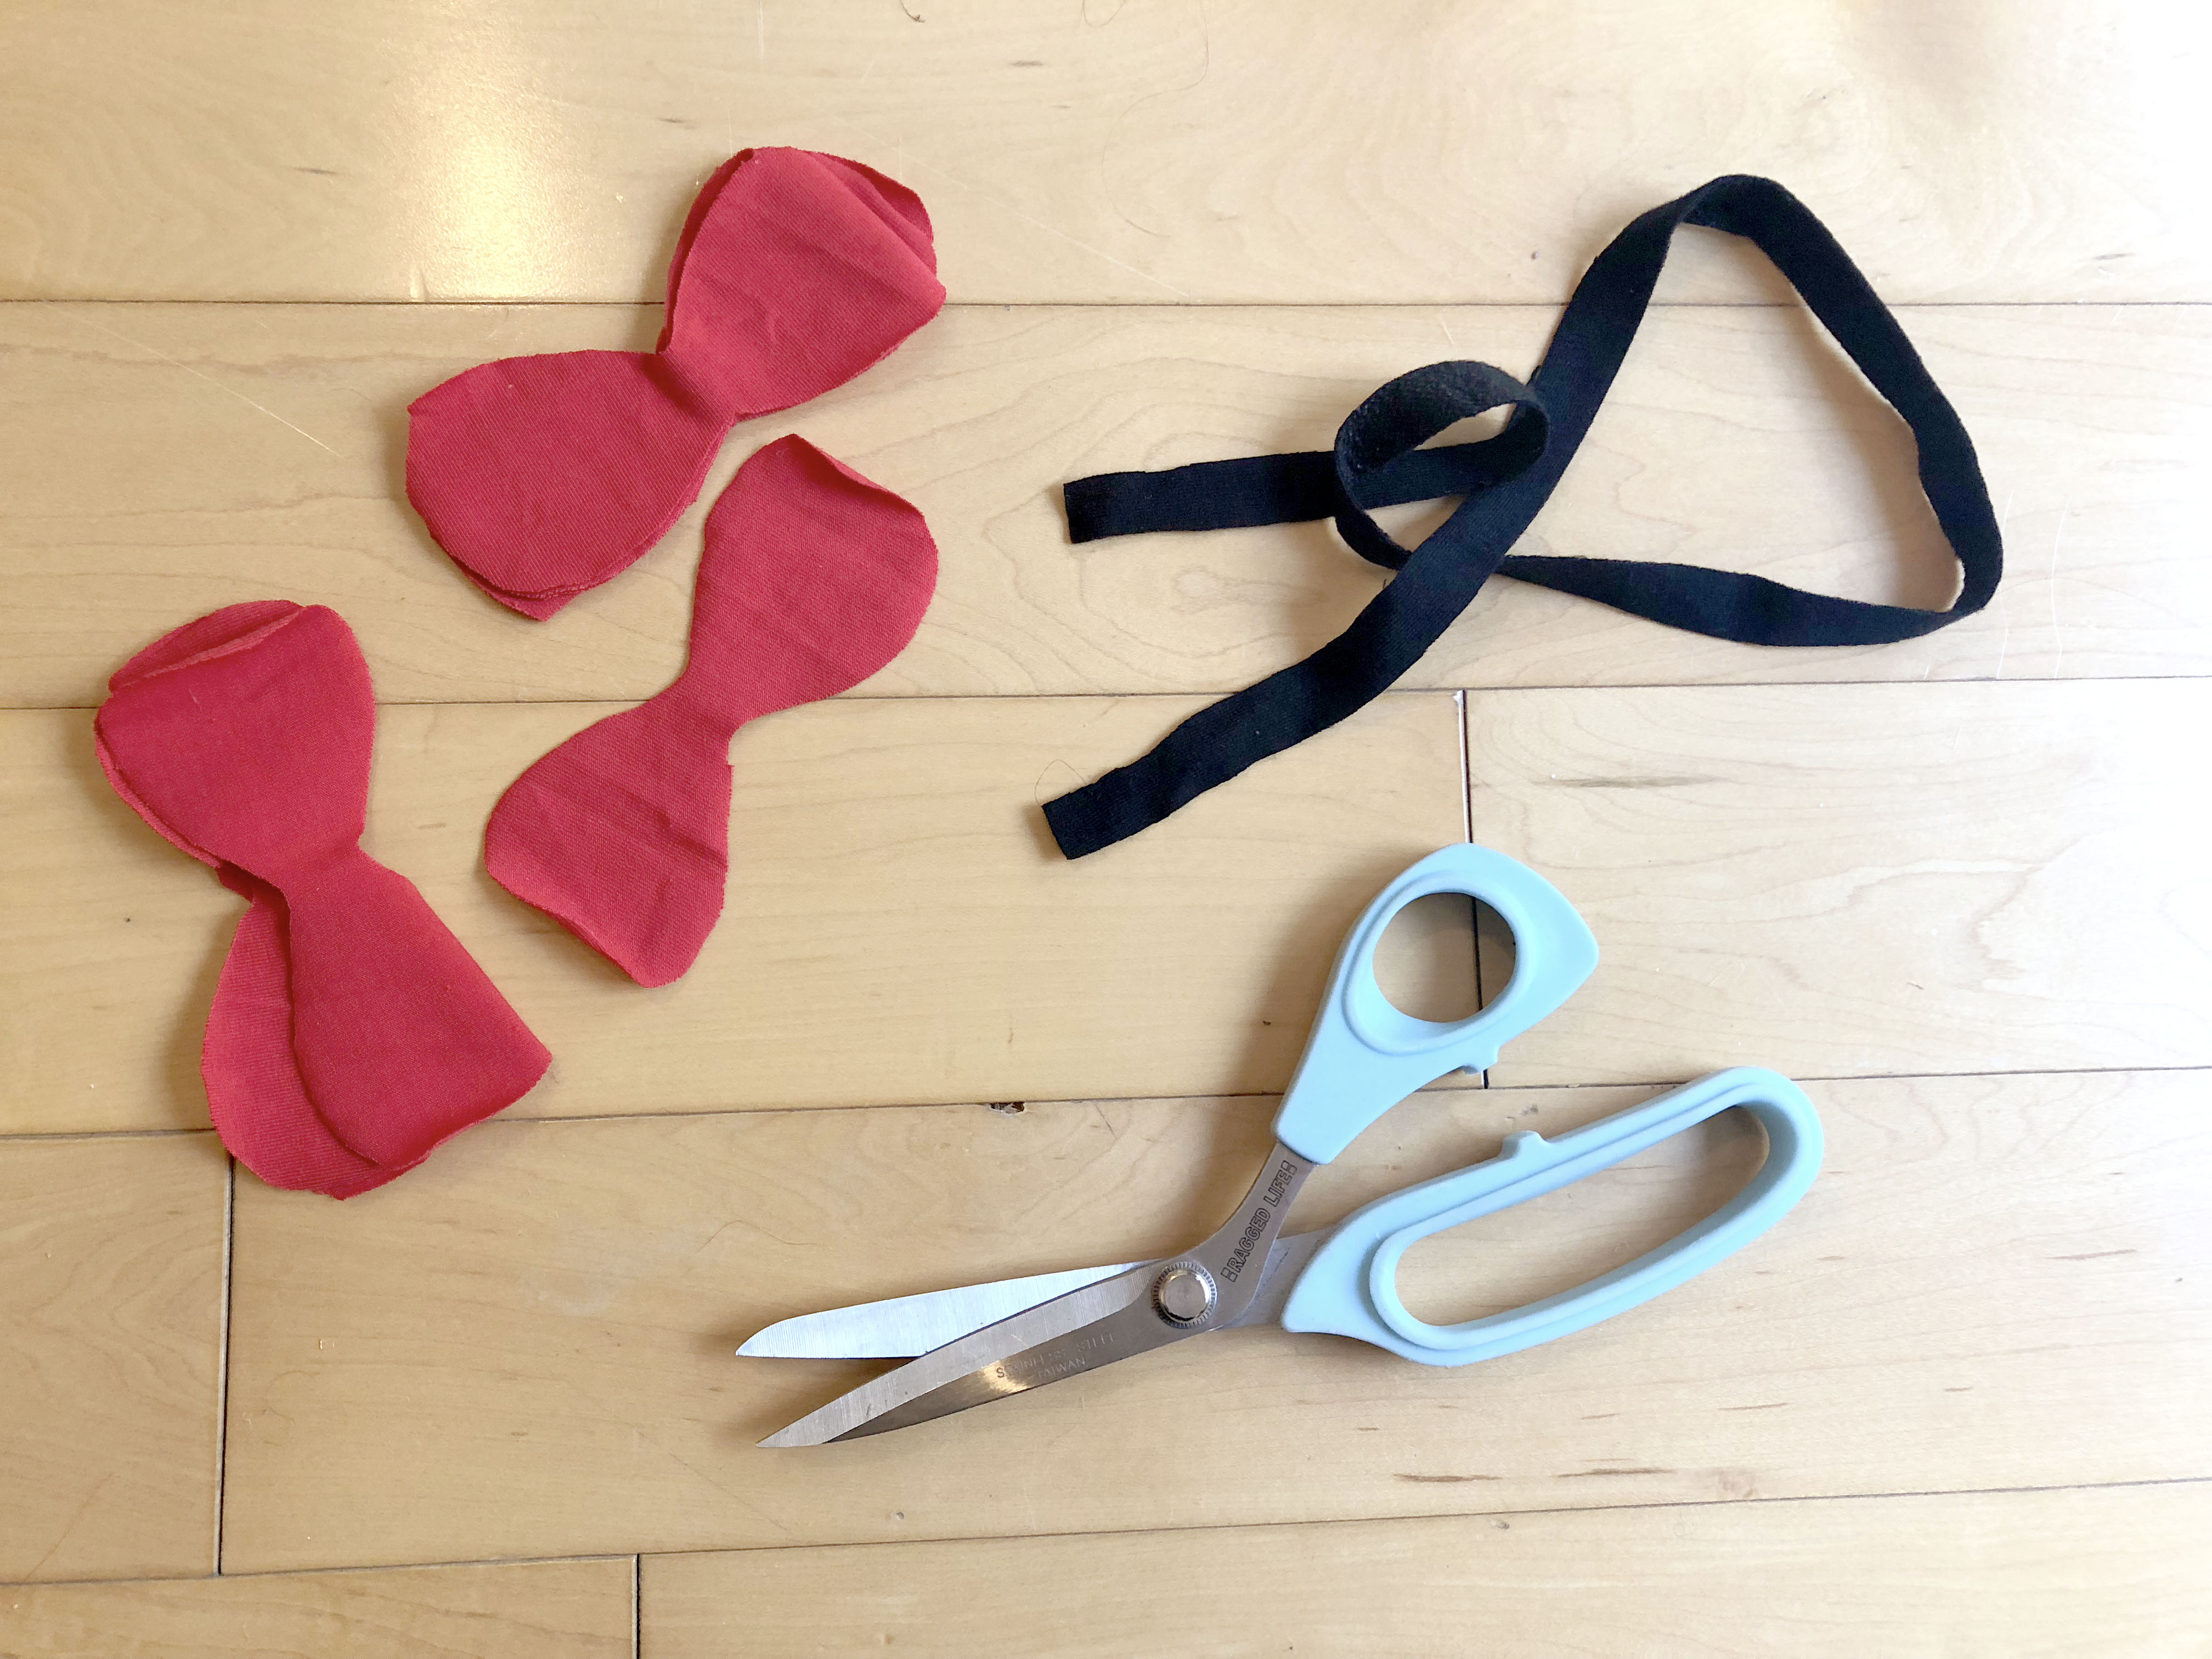 Fabric preparation for rag rug poppies with rag rug scissors